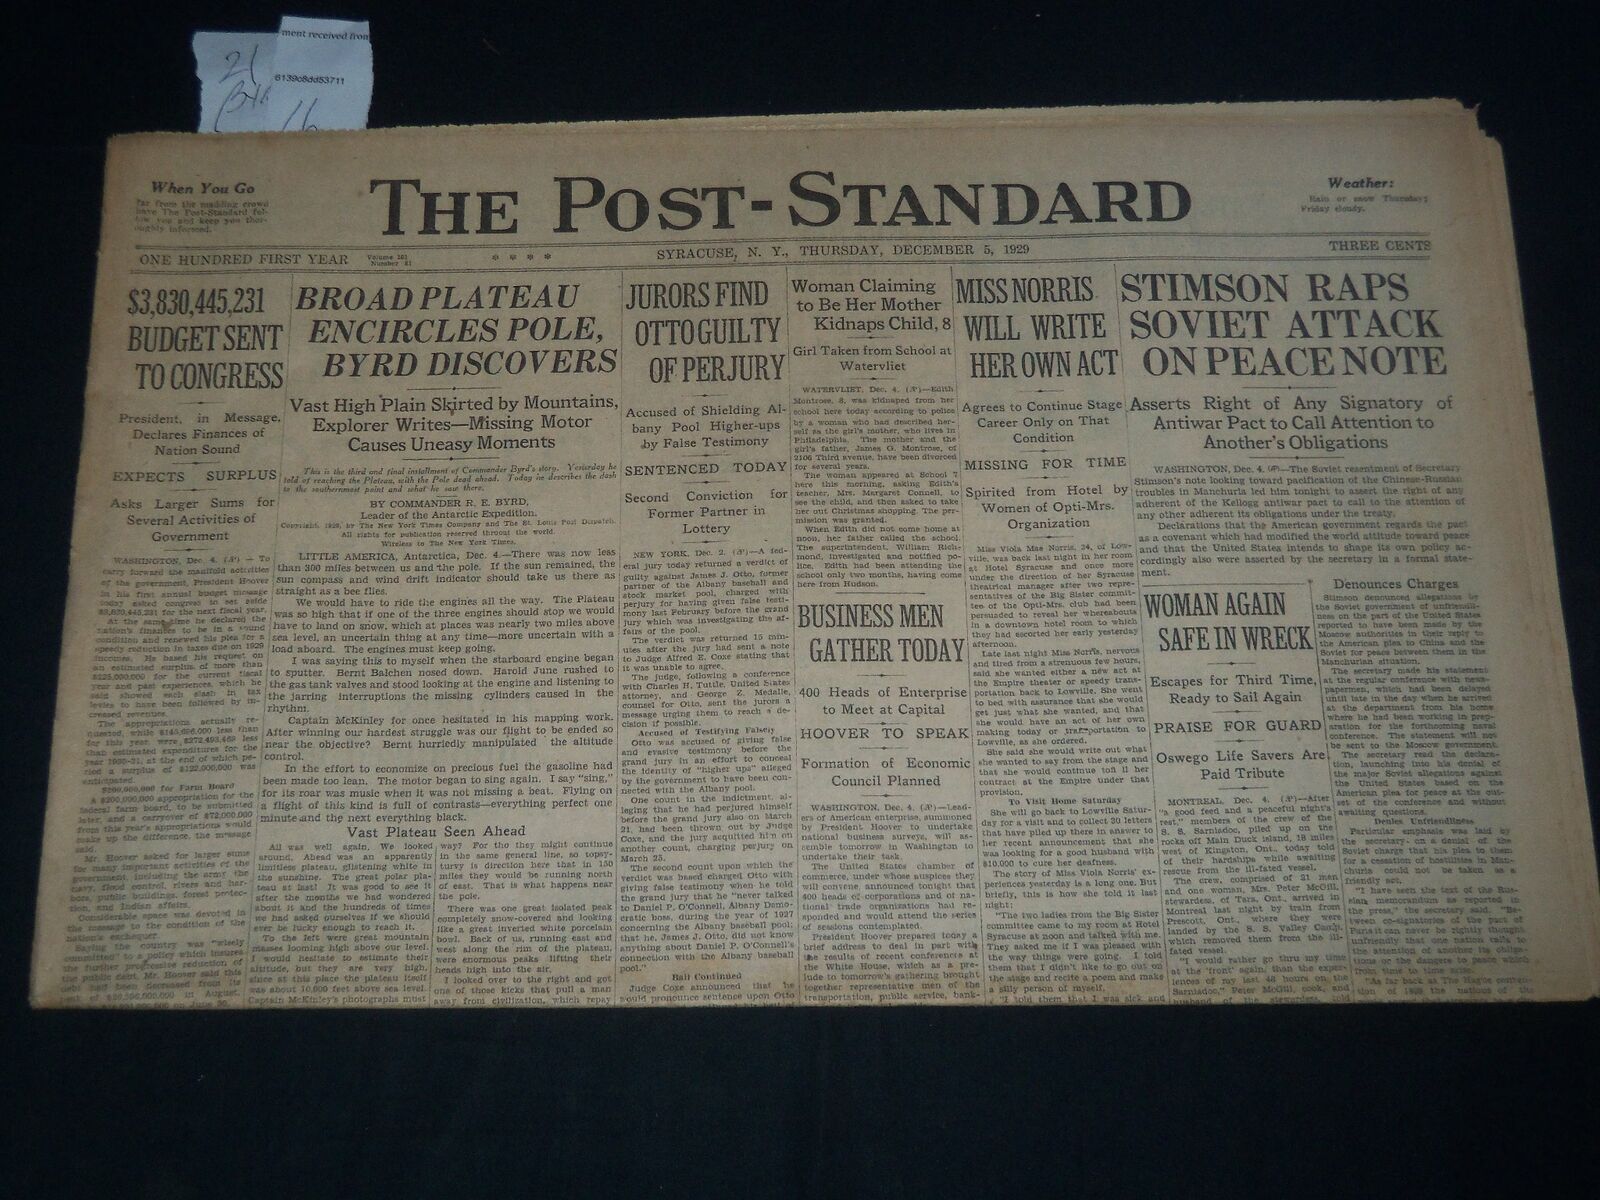 1929 DEC 5 THE POST-STANDARD - SYRACUSE - BYRD DISCOVERS BROAD PLATEAU - NP 3768